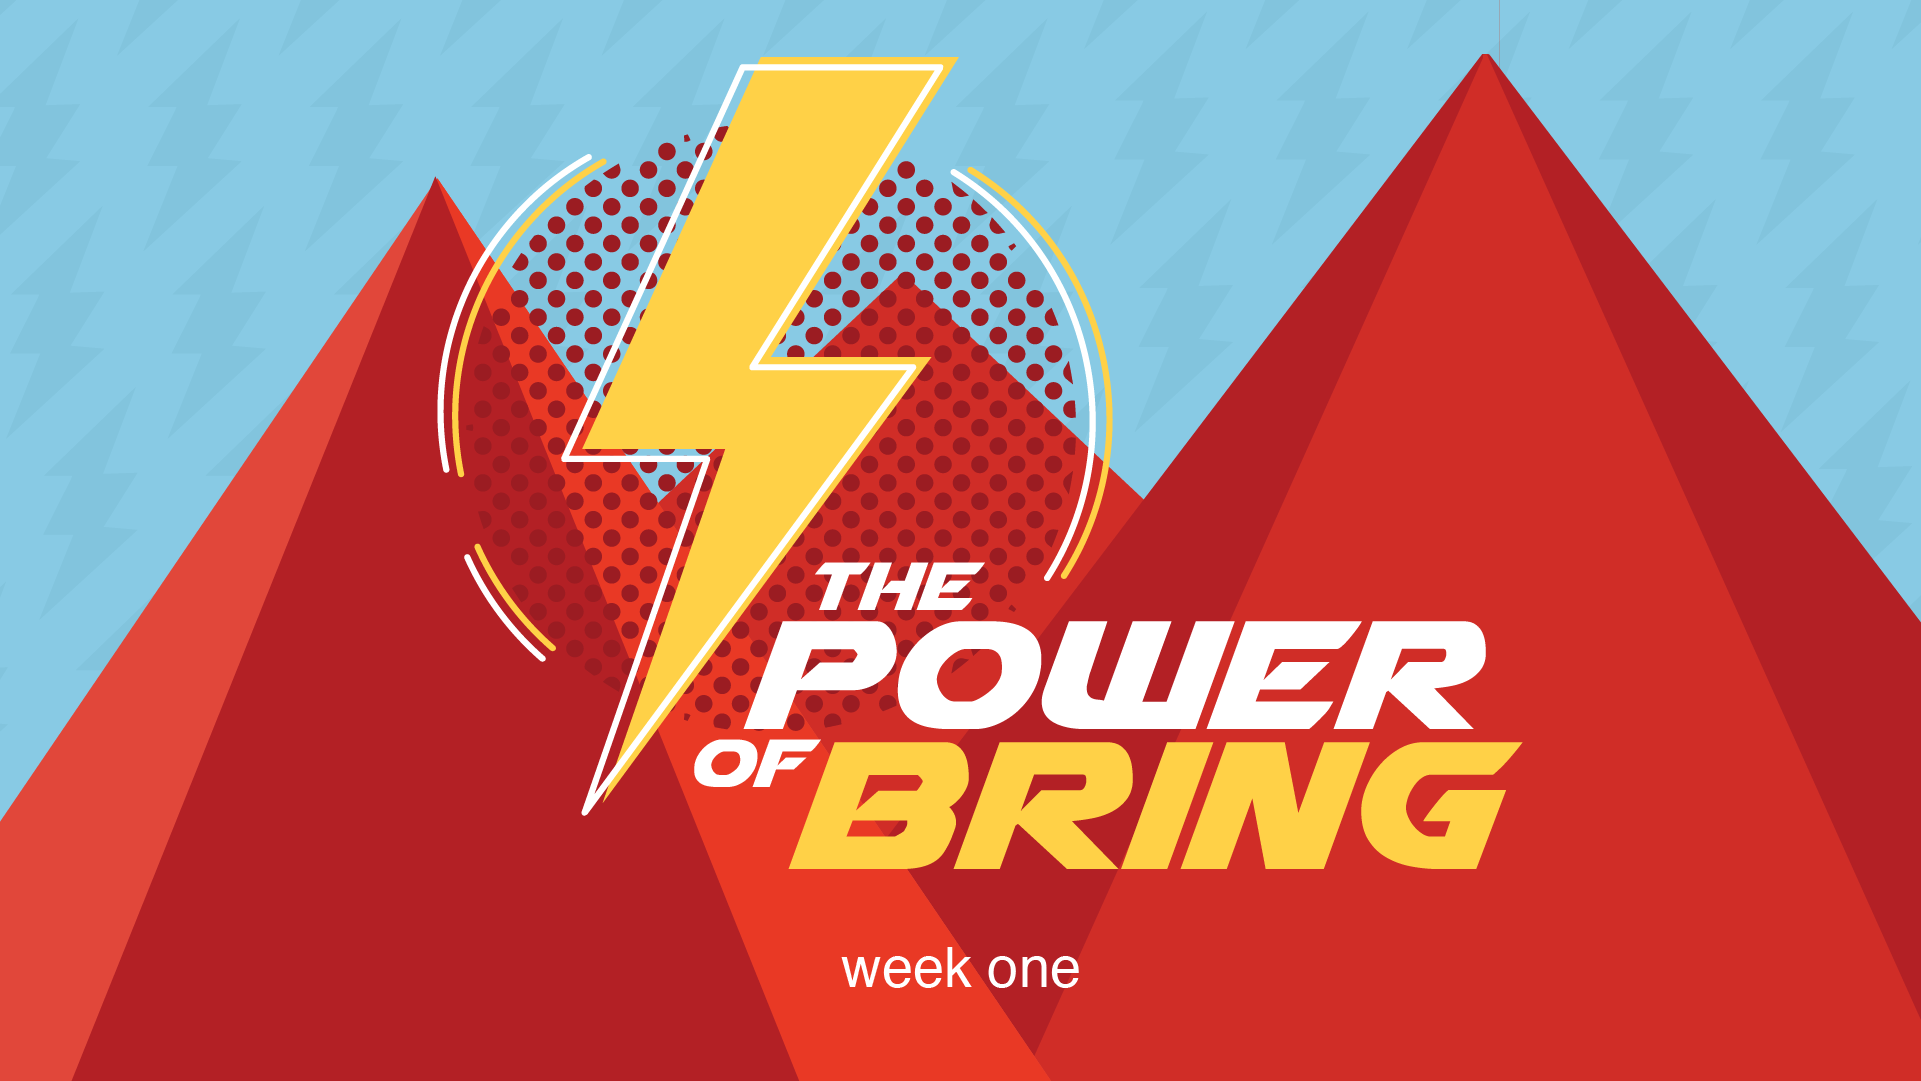 The Power of Bring - Week One